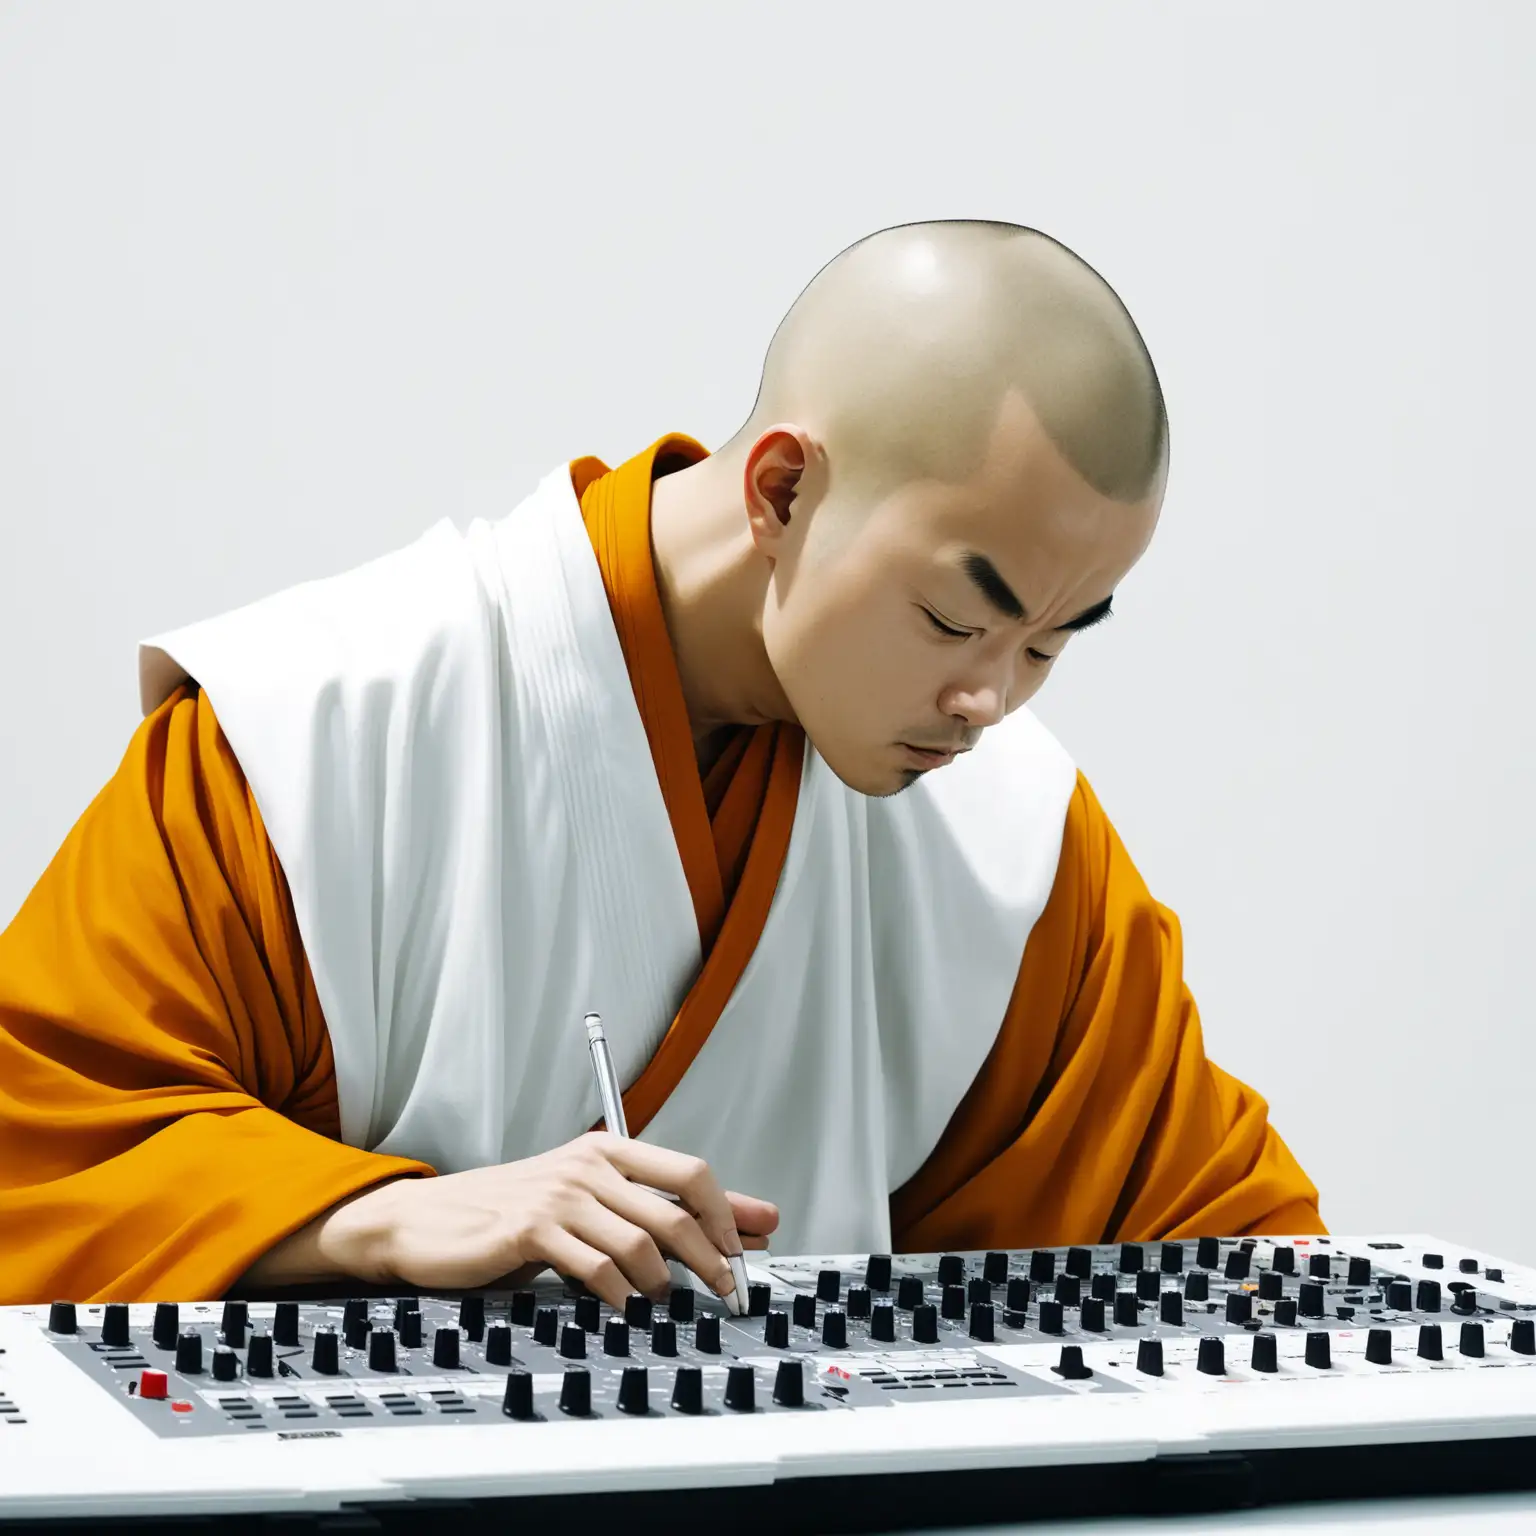 Shaolin Monk in White Studying at Mixing Desk in Minimalist Room